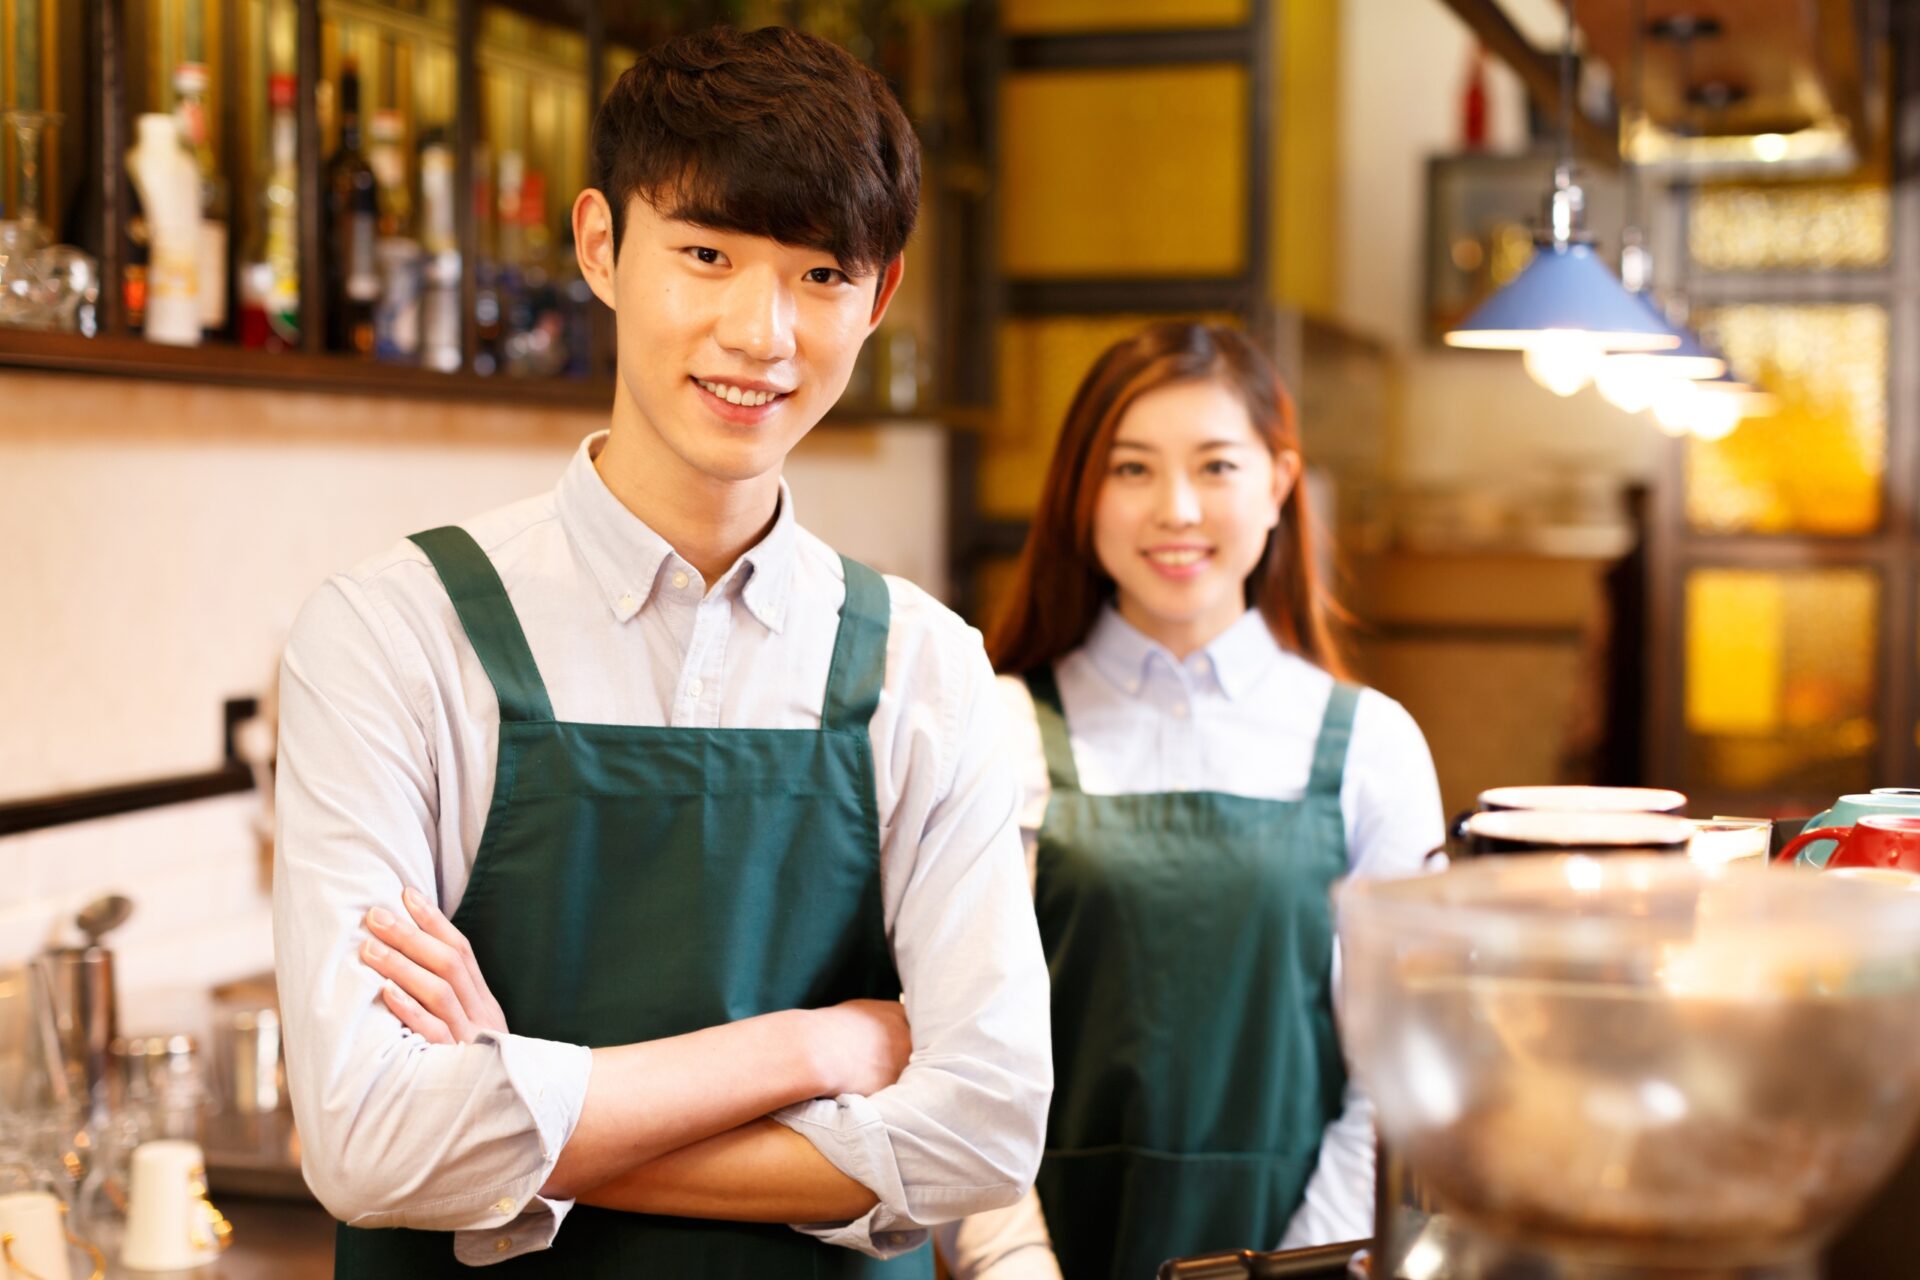 Best Types of Uniforms for Food Service Workers in 2023 | Accent Branding